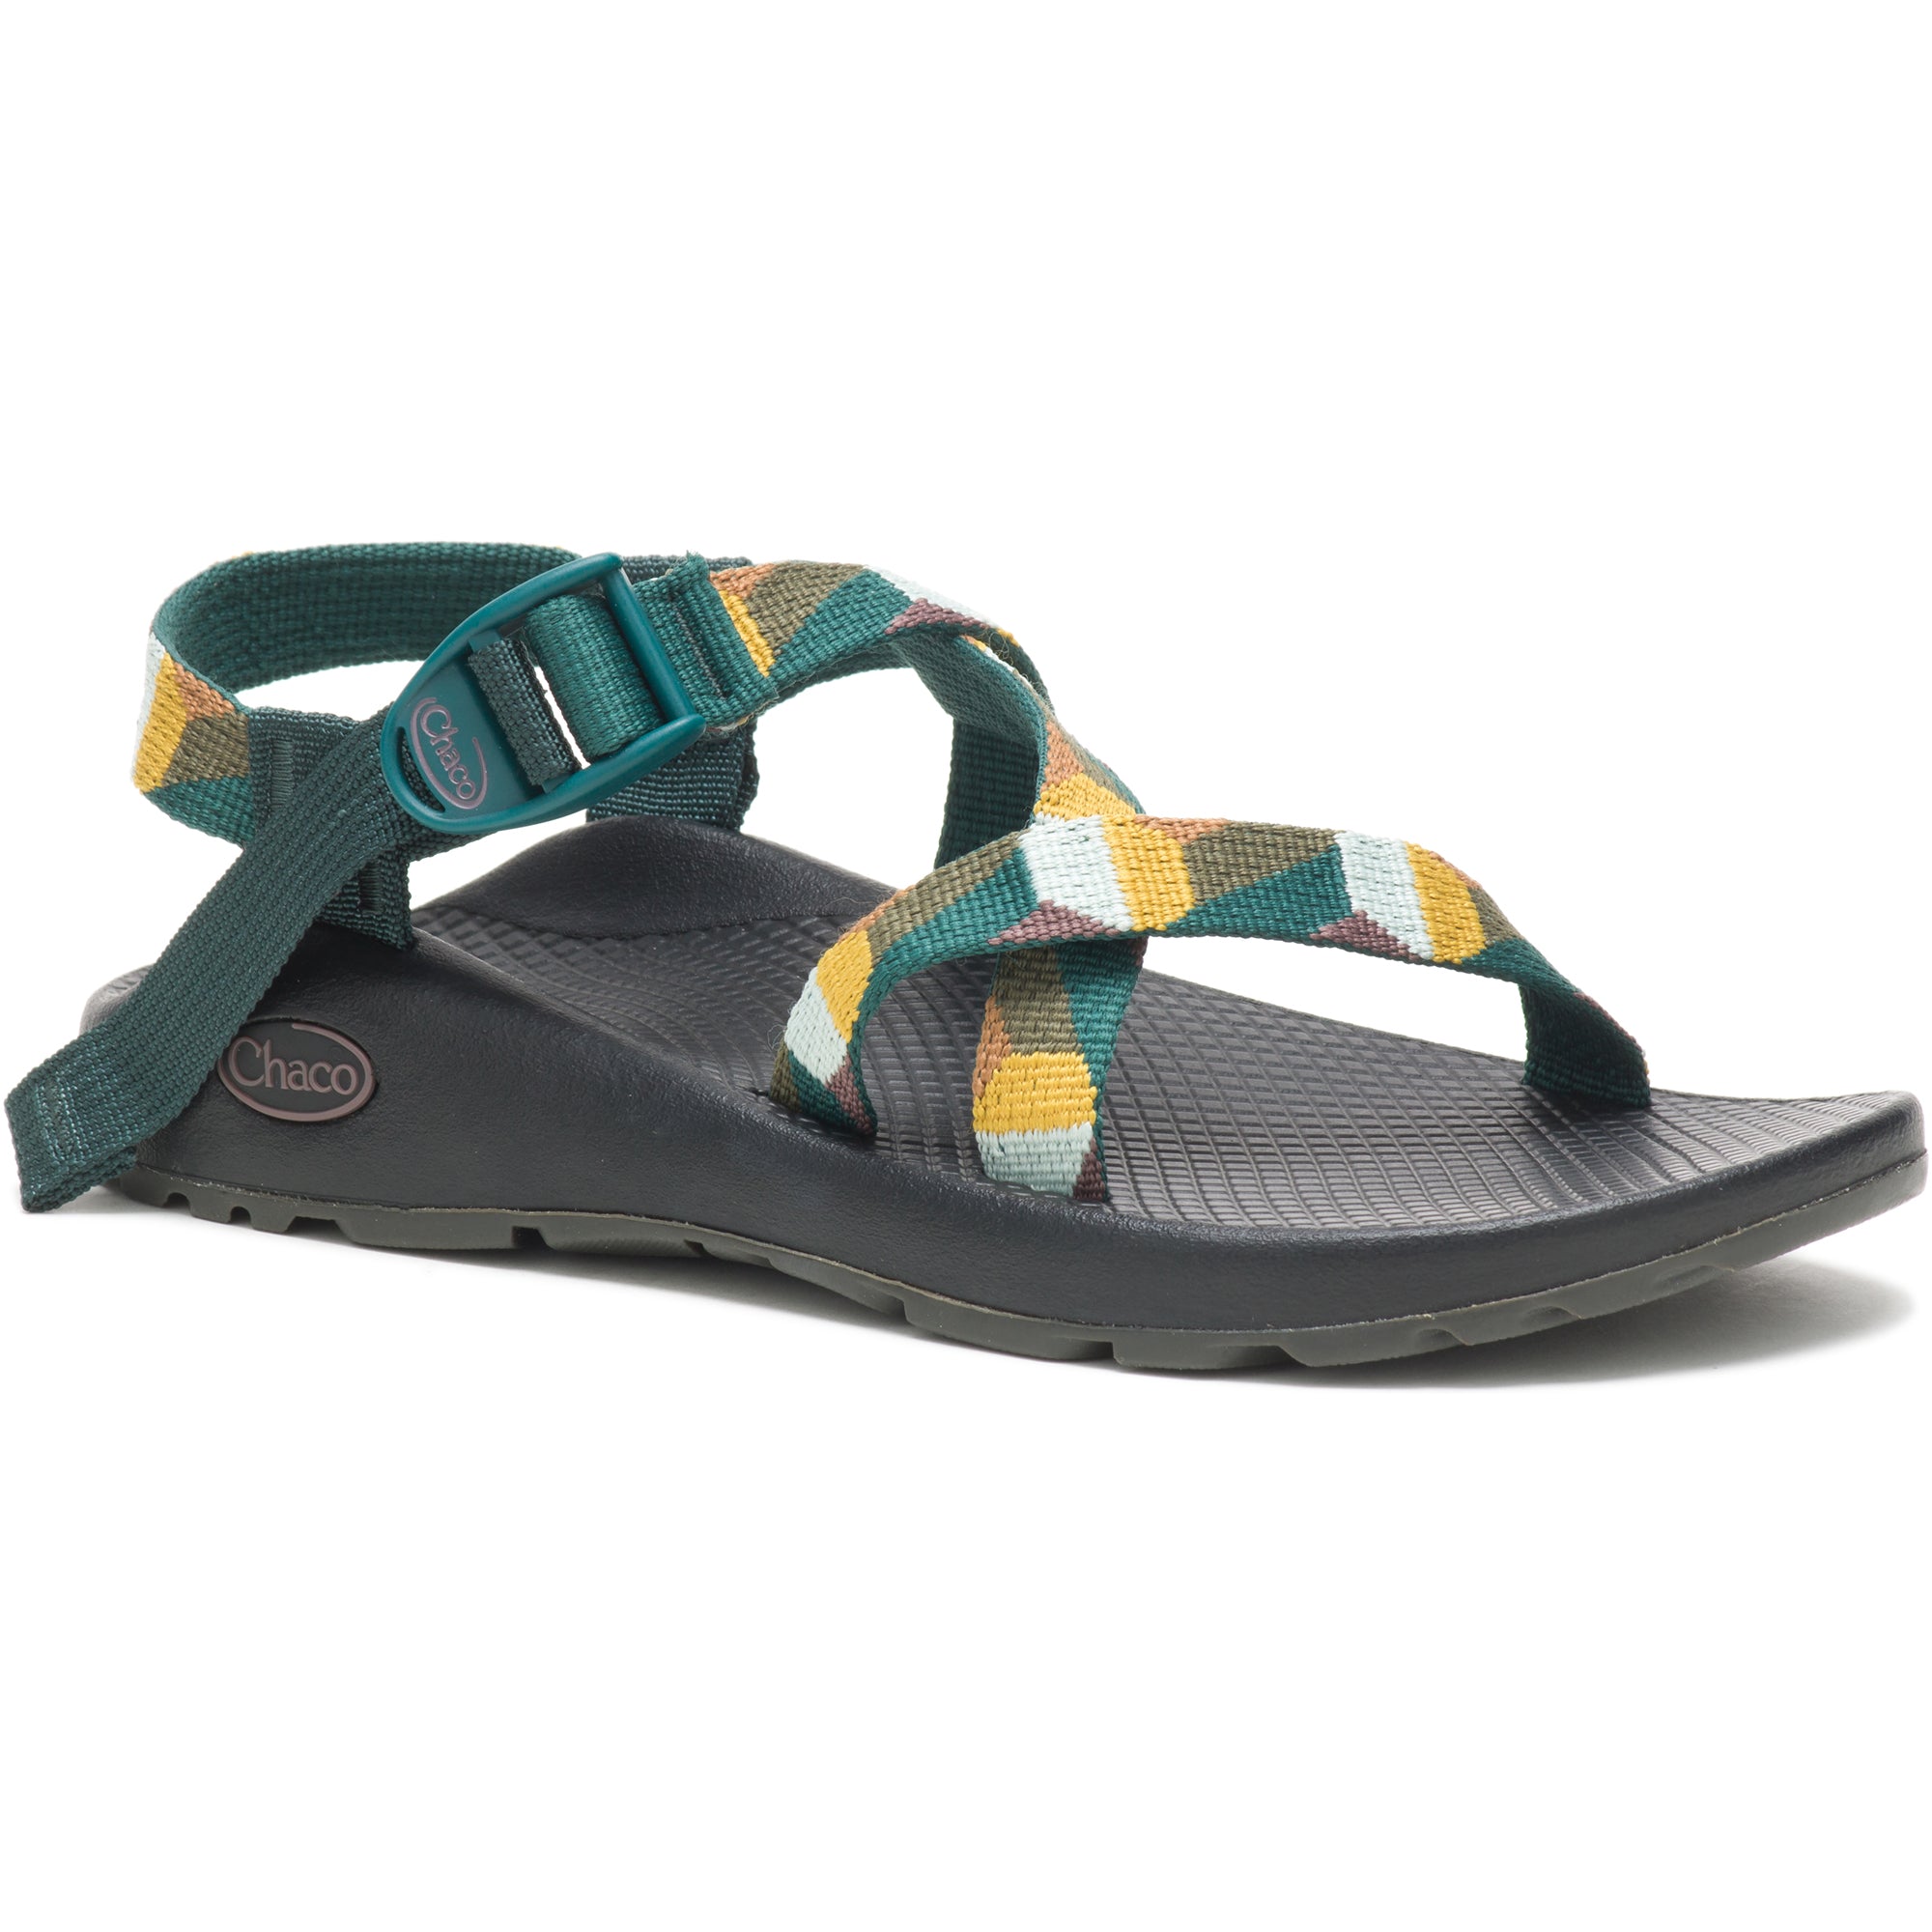 Chaco Women's Z1 Classic Sandals JCH109048